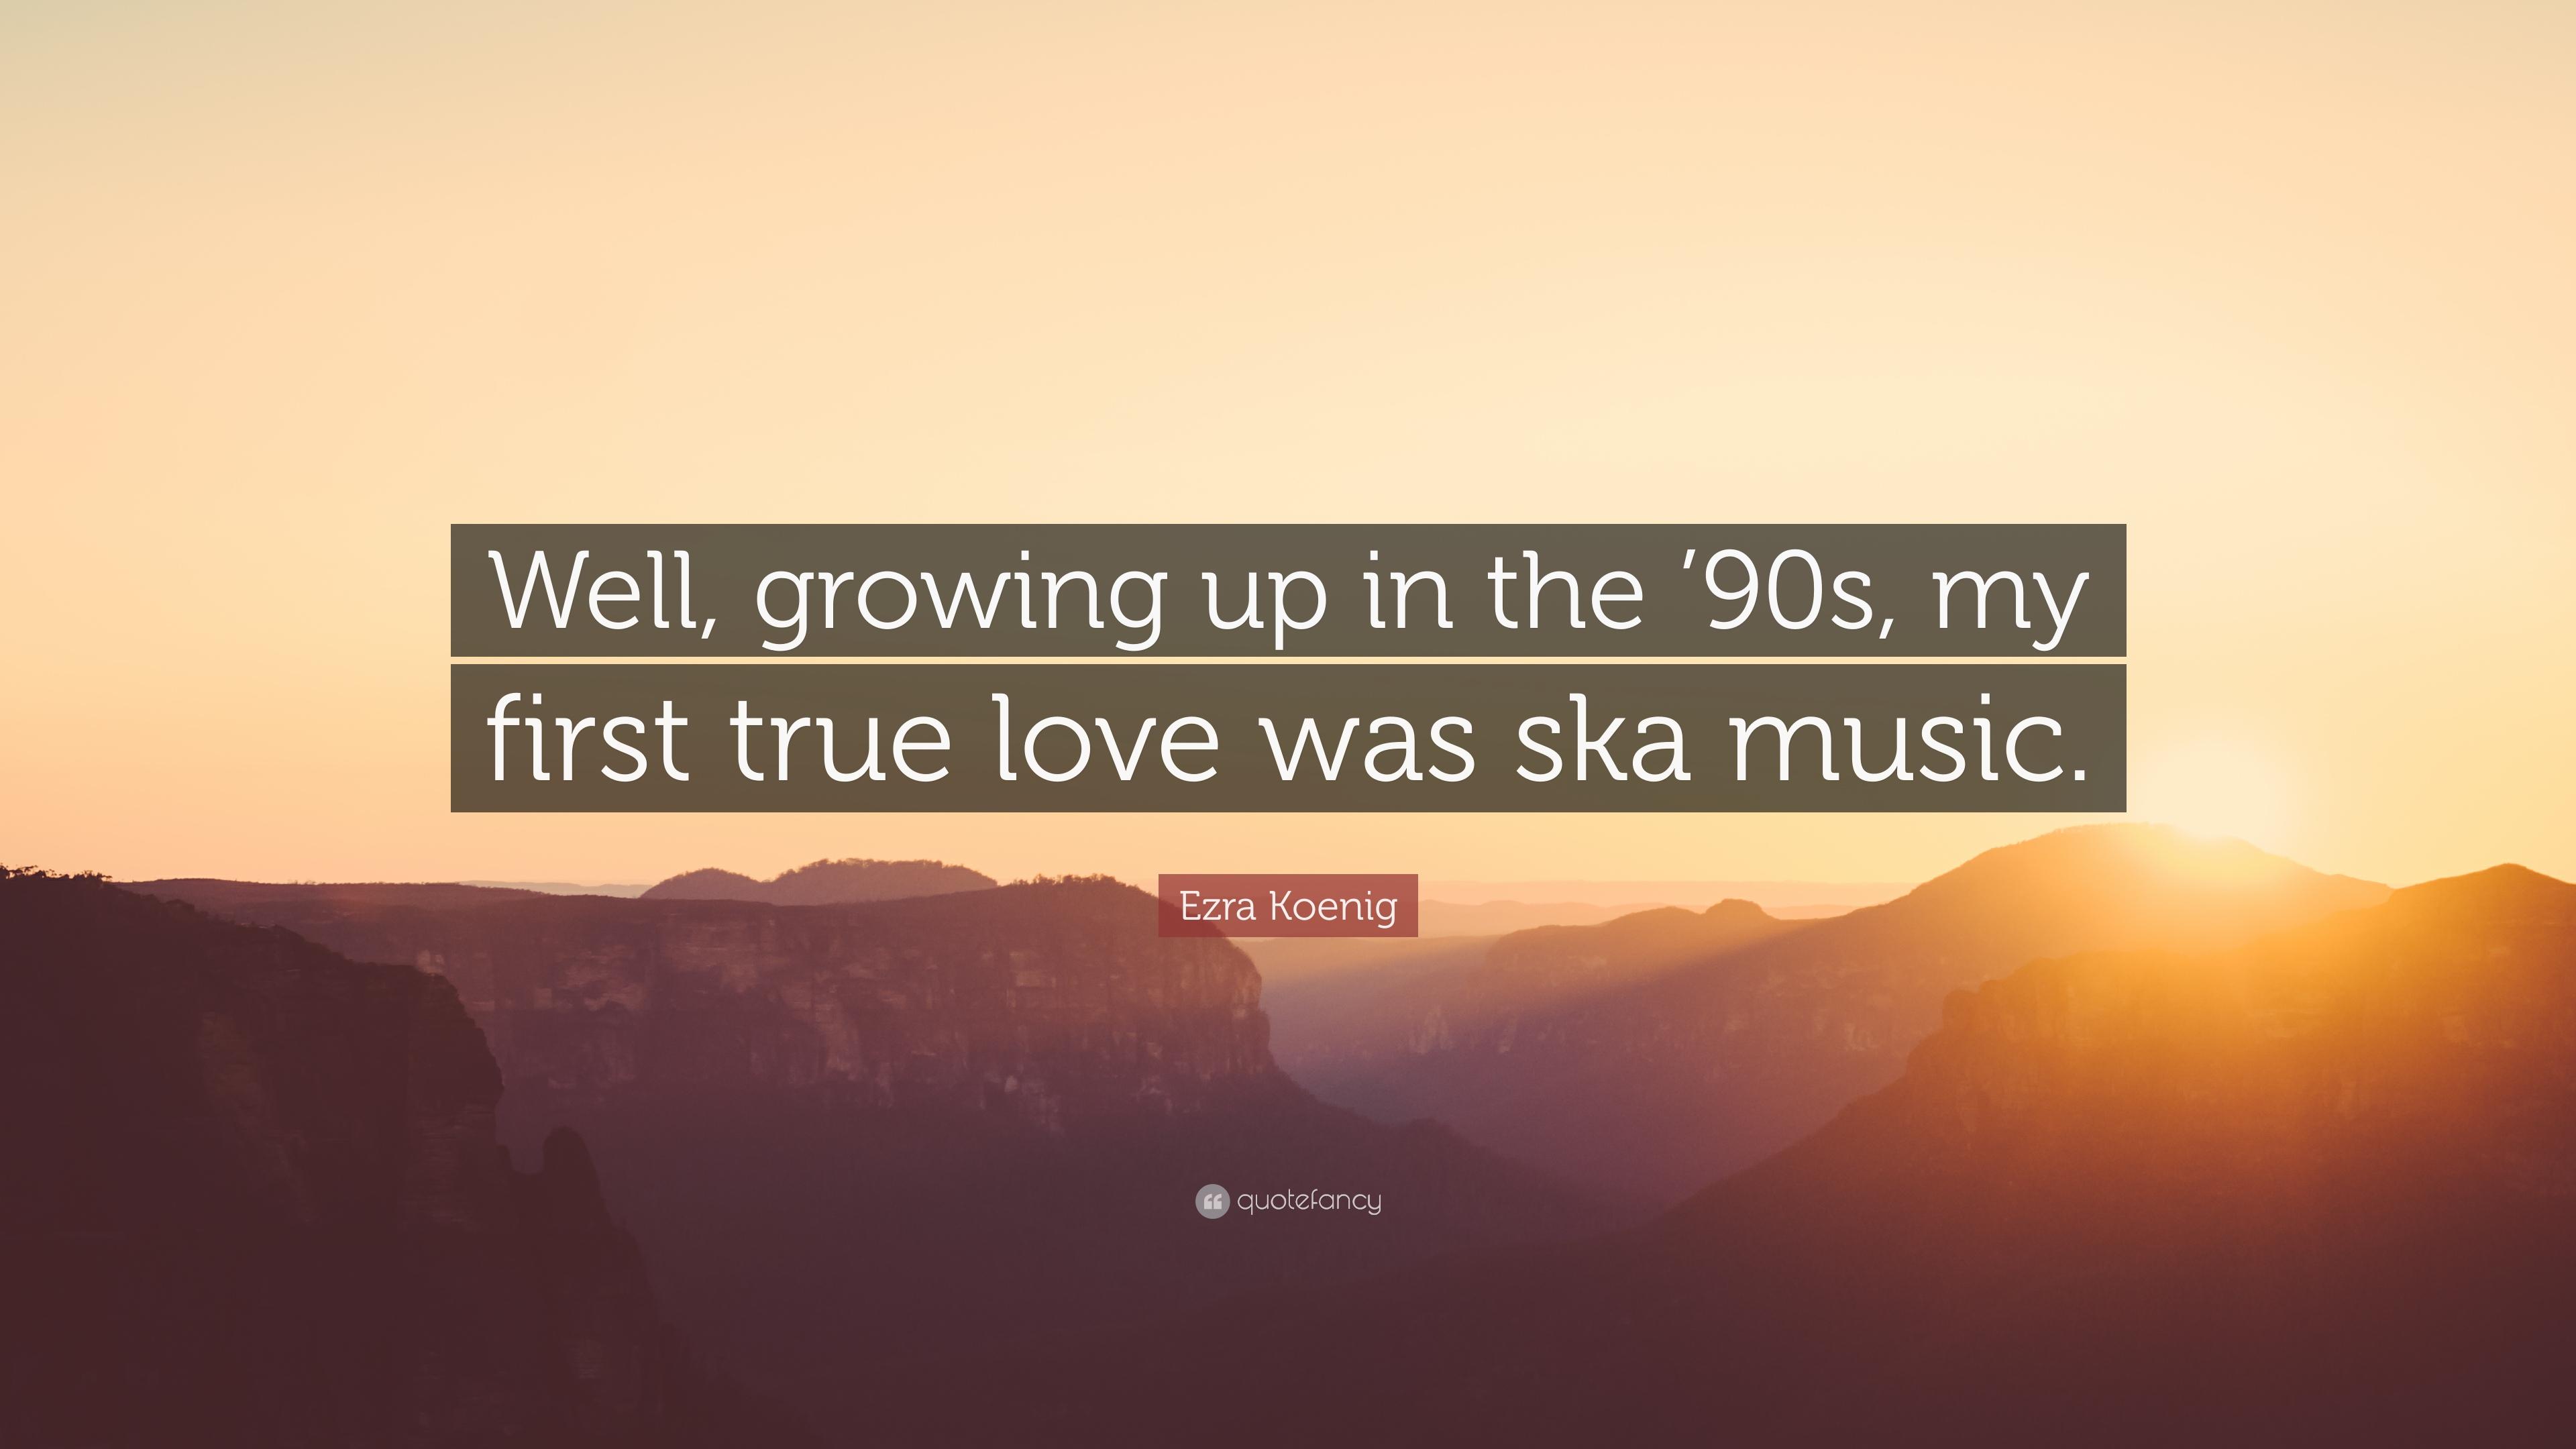 Ezra Koenig Quote: "Well, growing up in the '90s, my first true l...